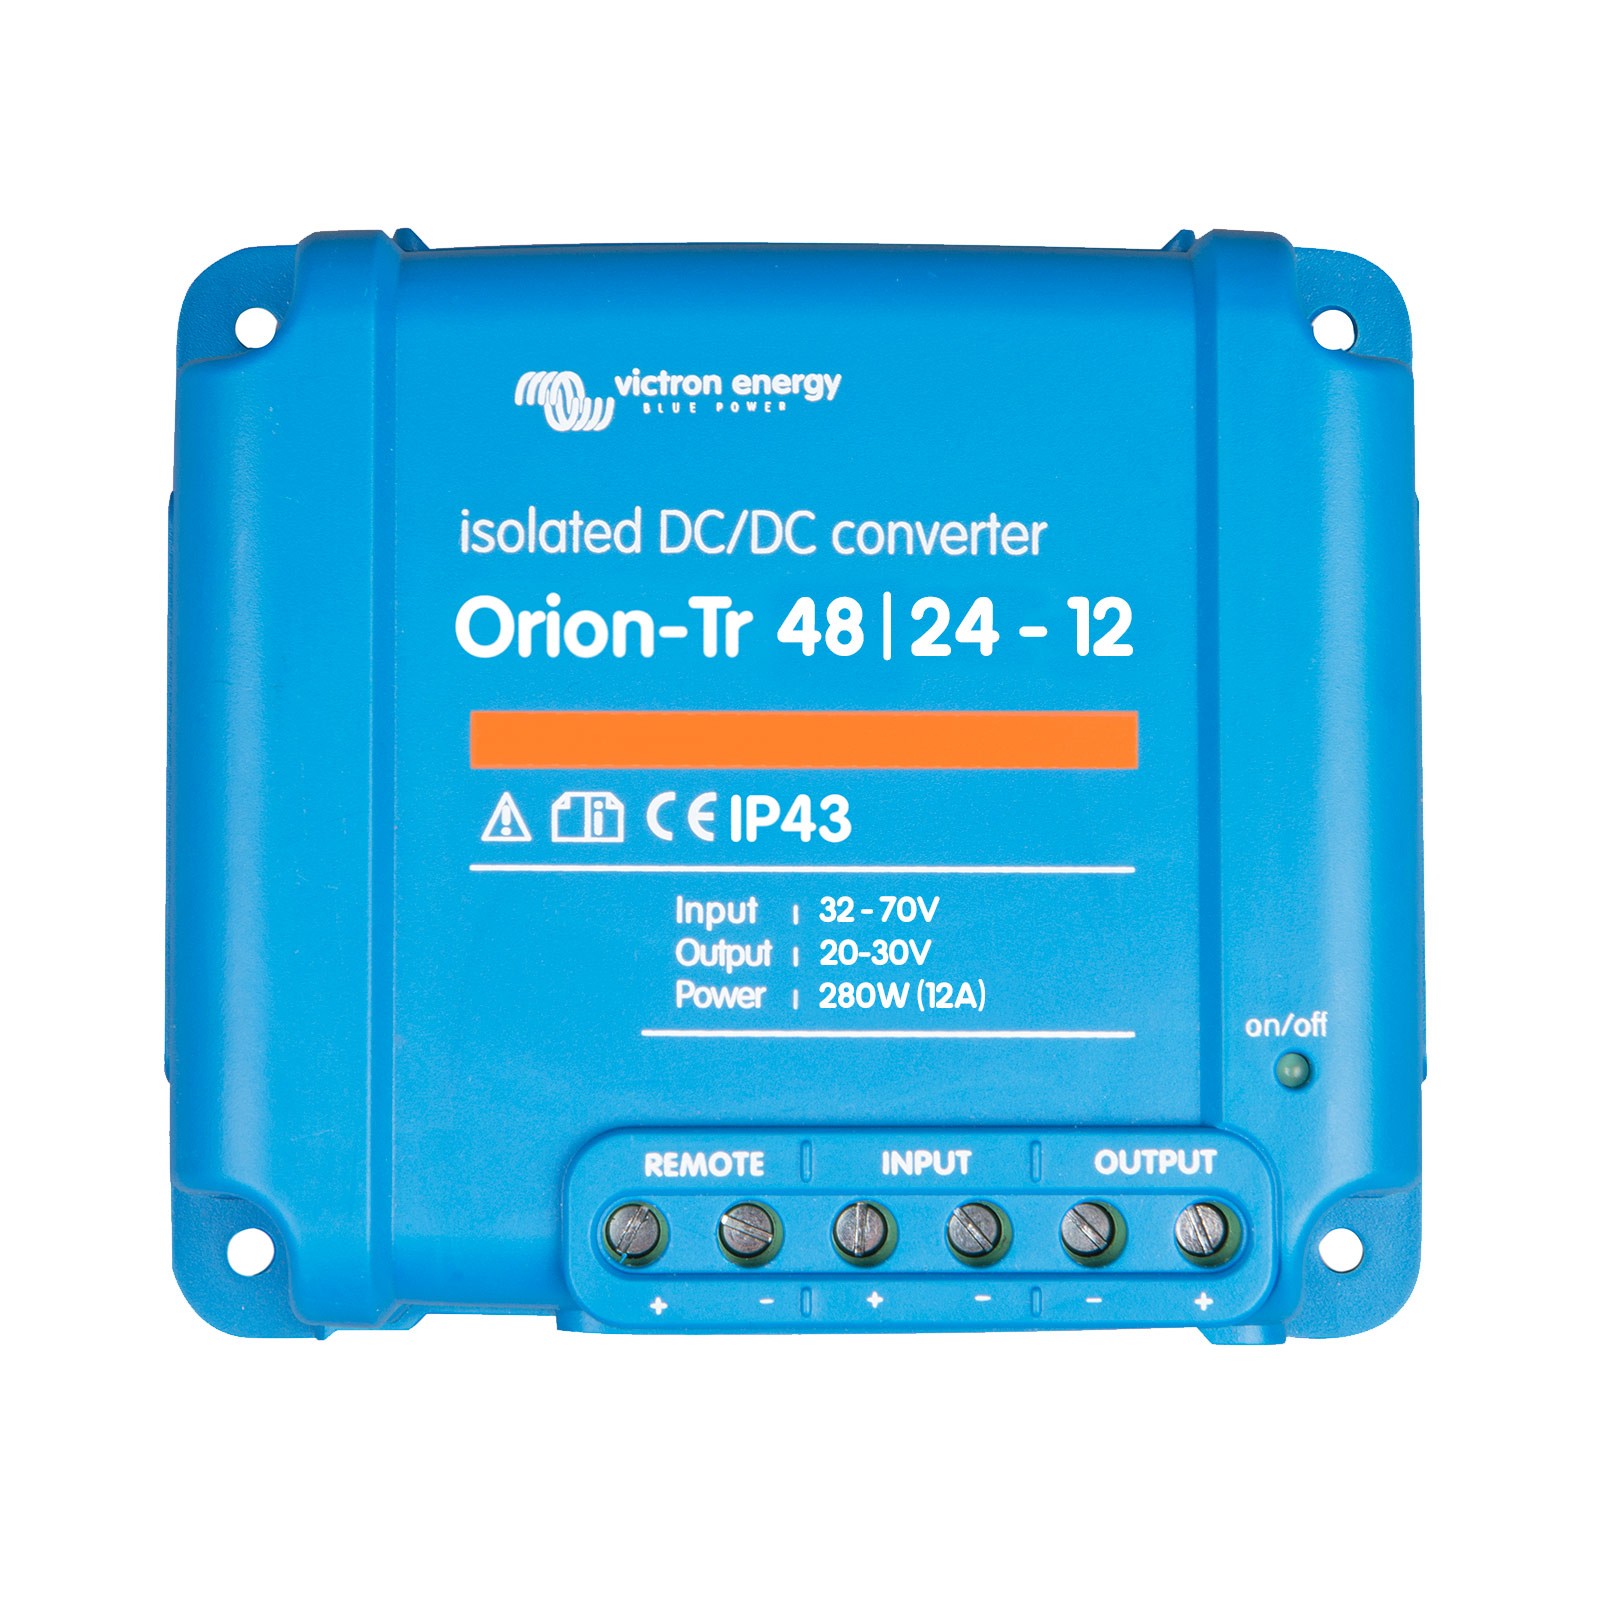 Isolierter Konverter Orion-Tr 48/24-12 A Victron Energy